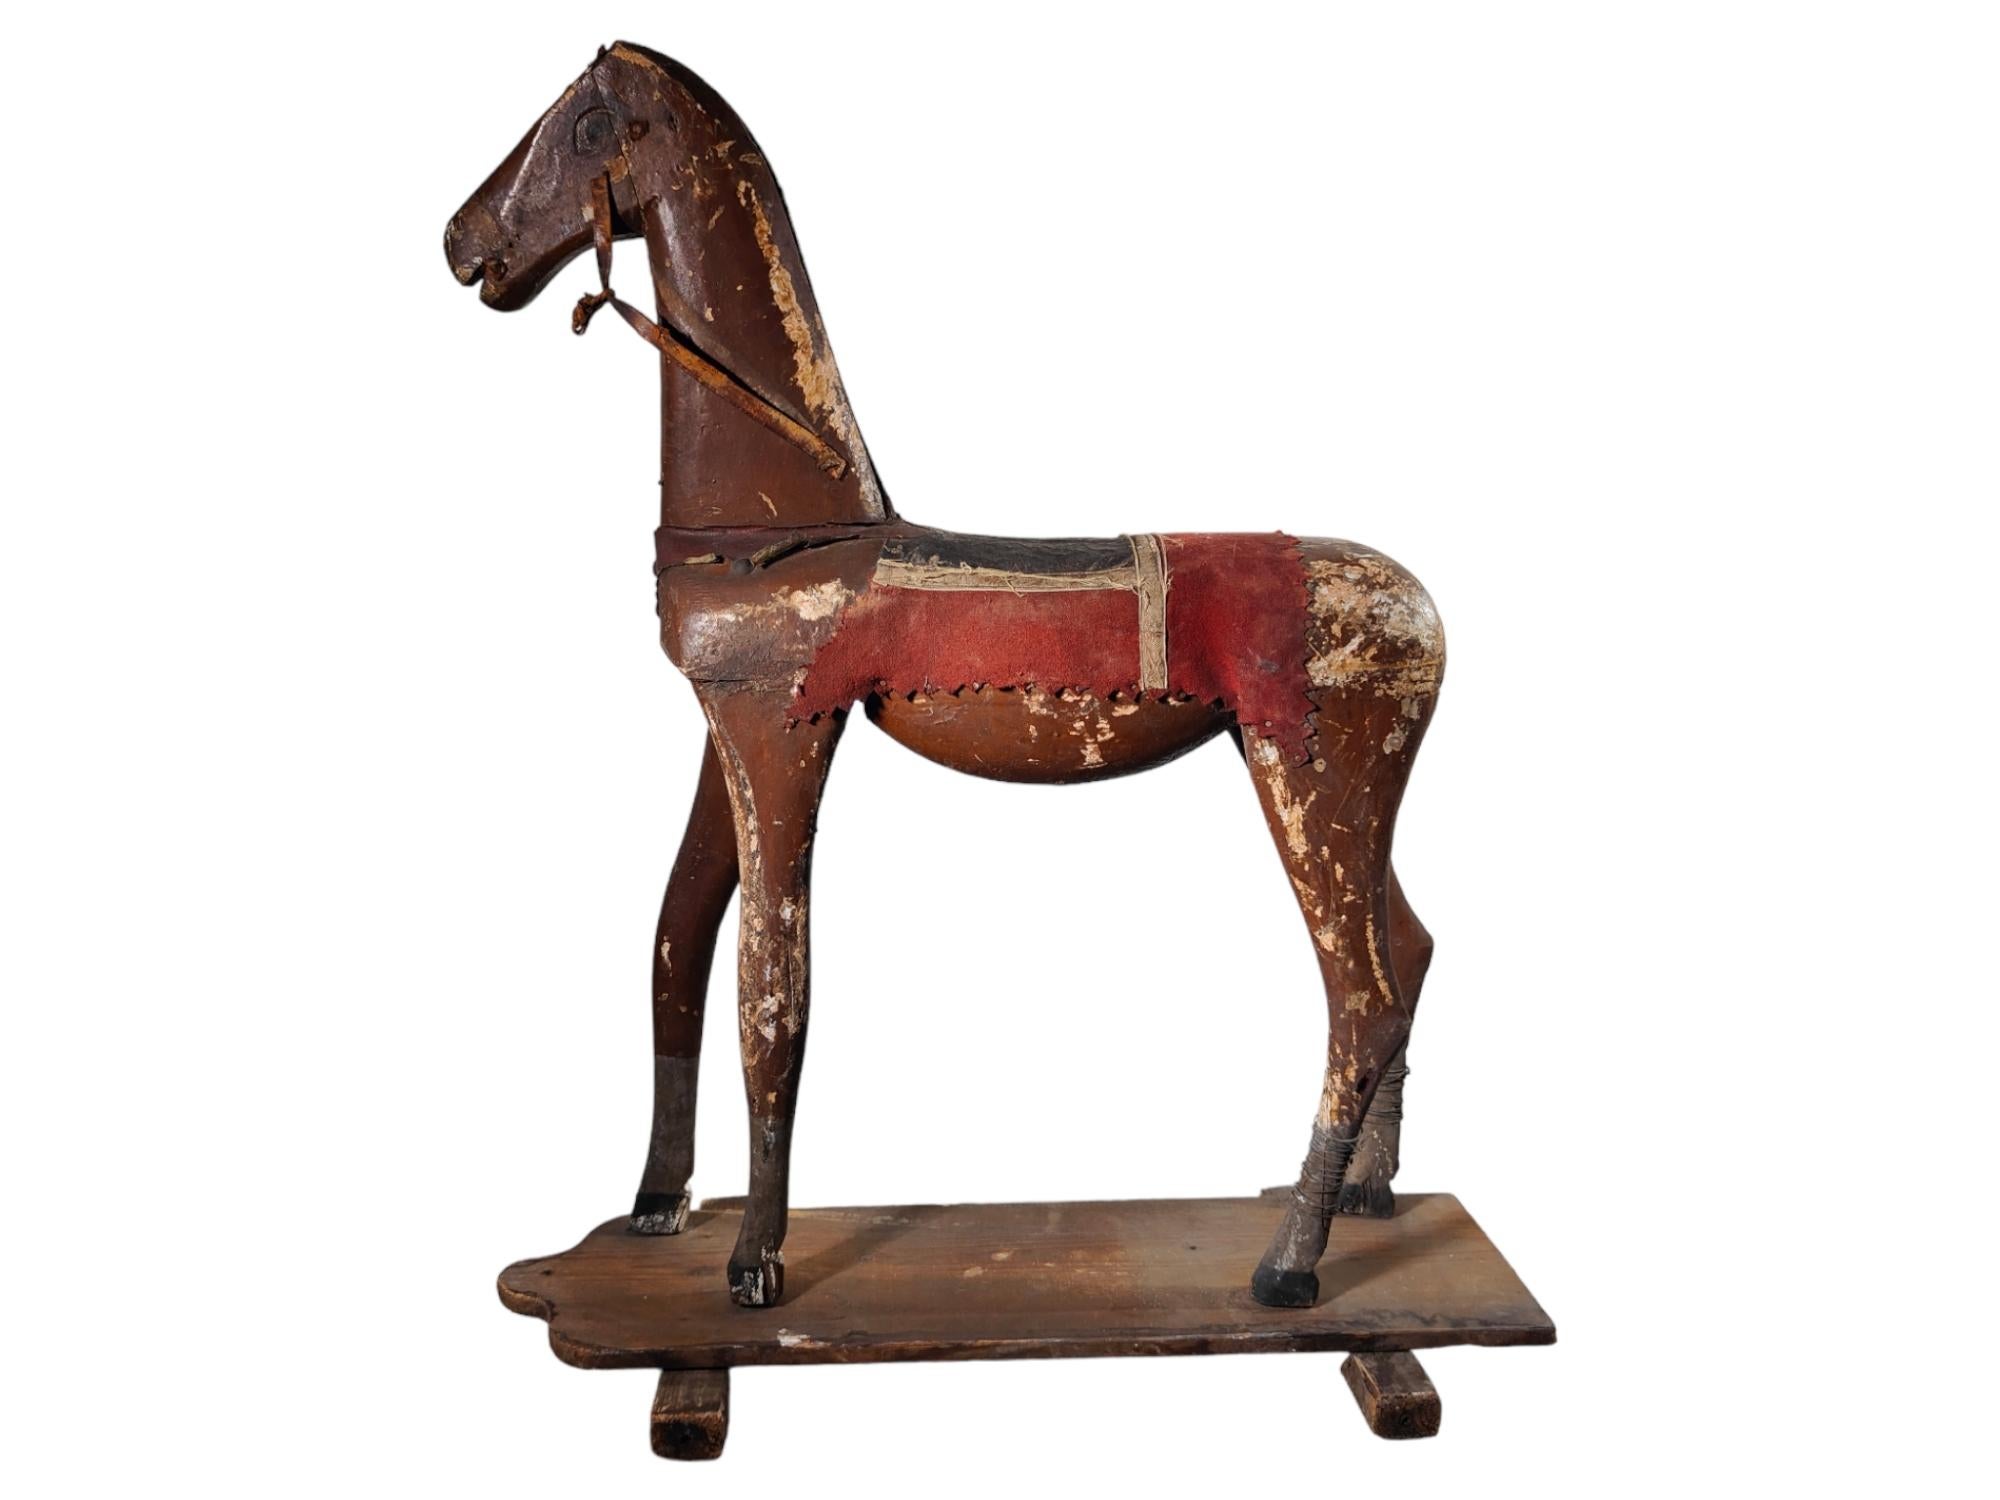 Old wooden horse 19th century.
19th century Wooden horse. It has many use and can be used as a decoration. He has very surrealistic long legs. It is made of painted wood. In its original condition. Measurements: 70x60x24cm.